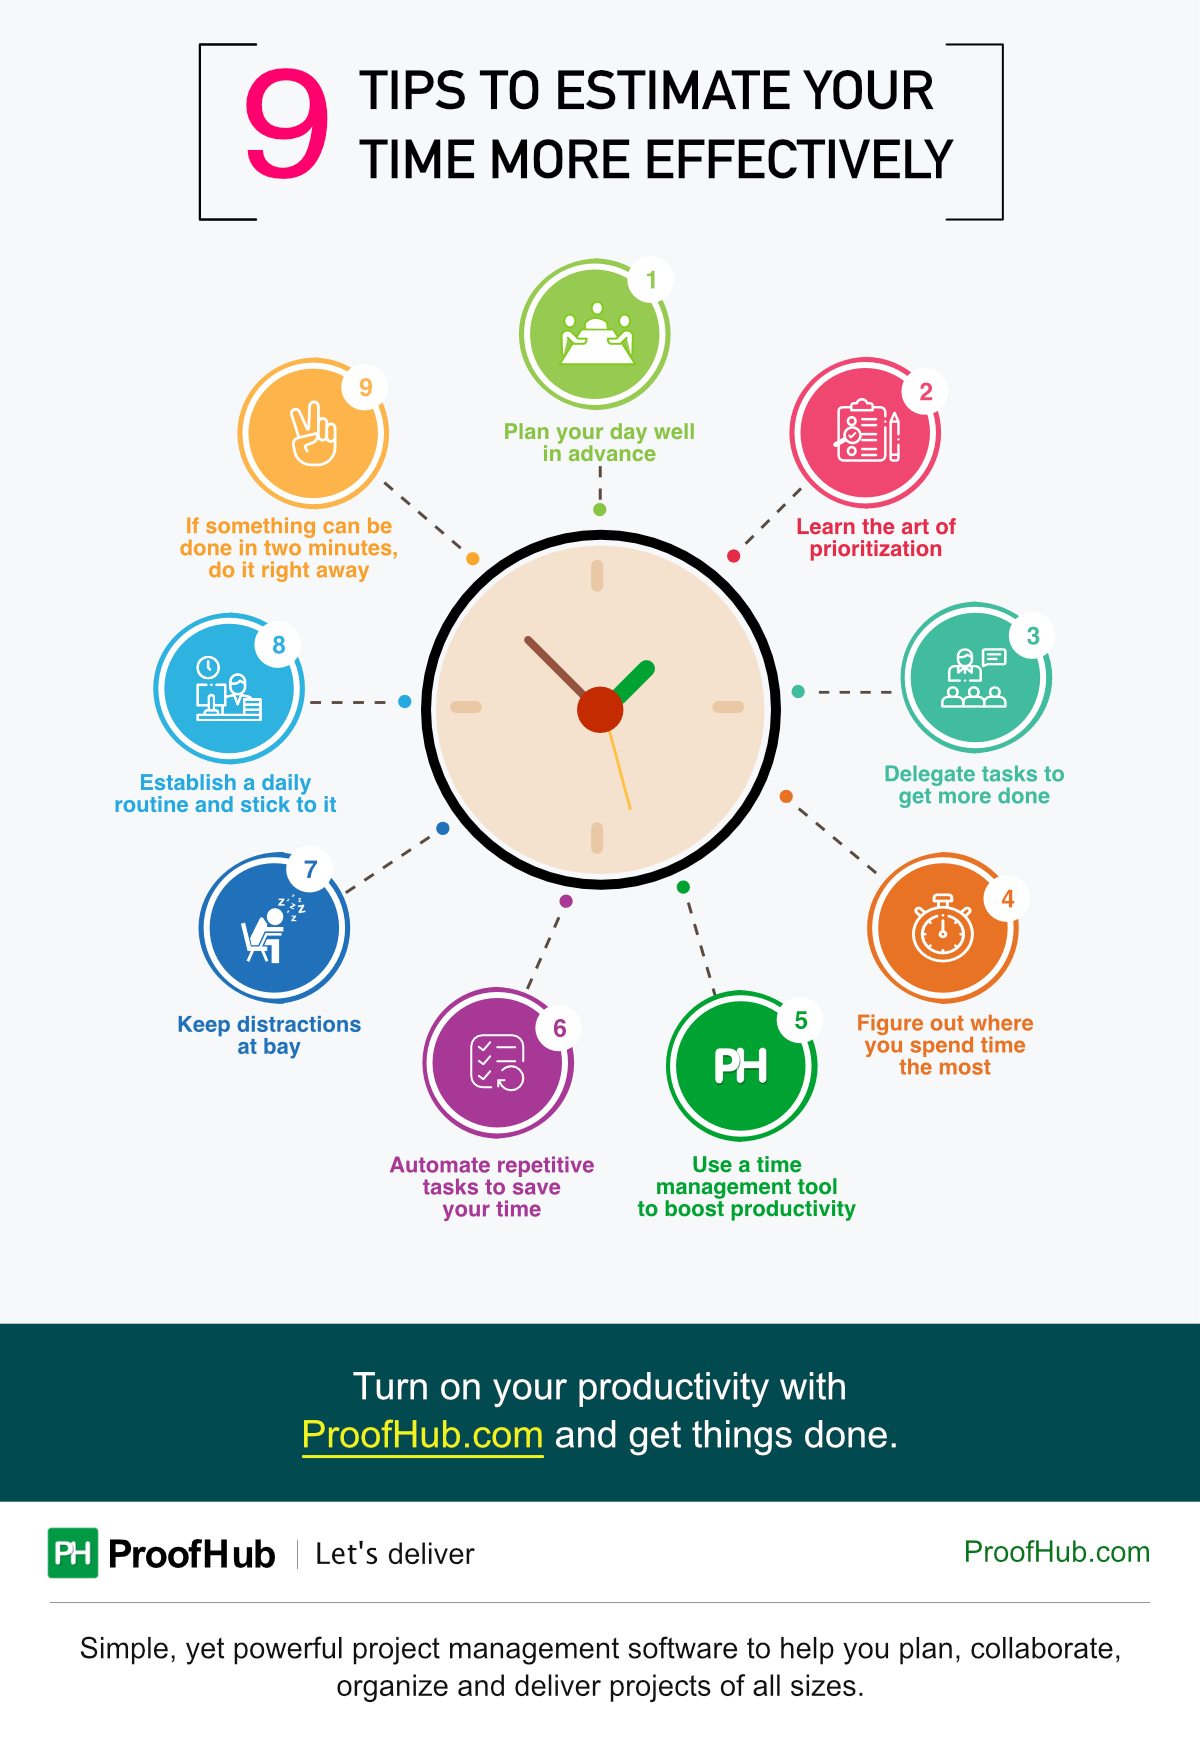 9 Quick Tips to Estimate and Time Better